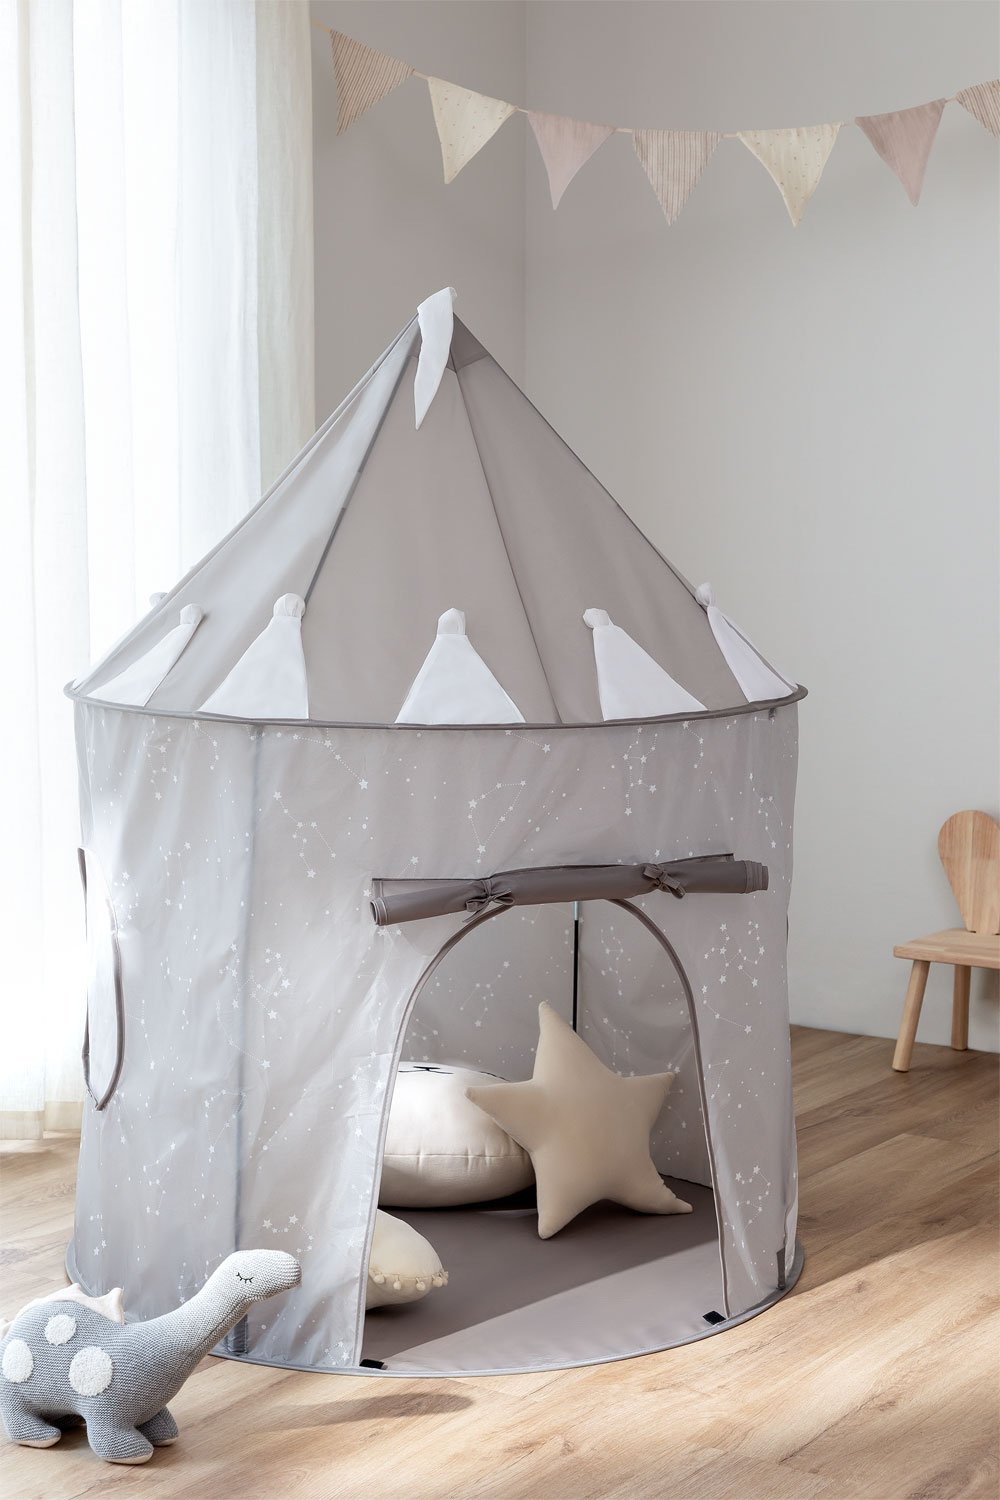 Foldable Play Tent Dulcenia Kids , gallery image 1